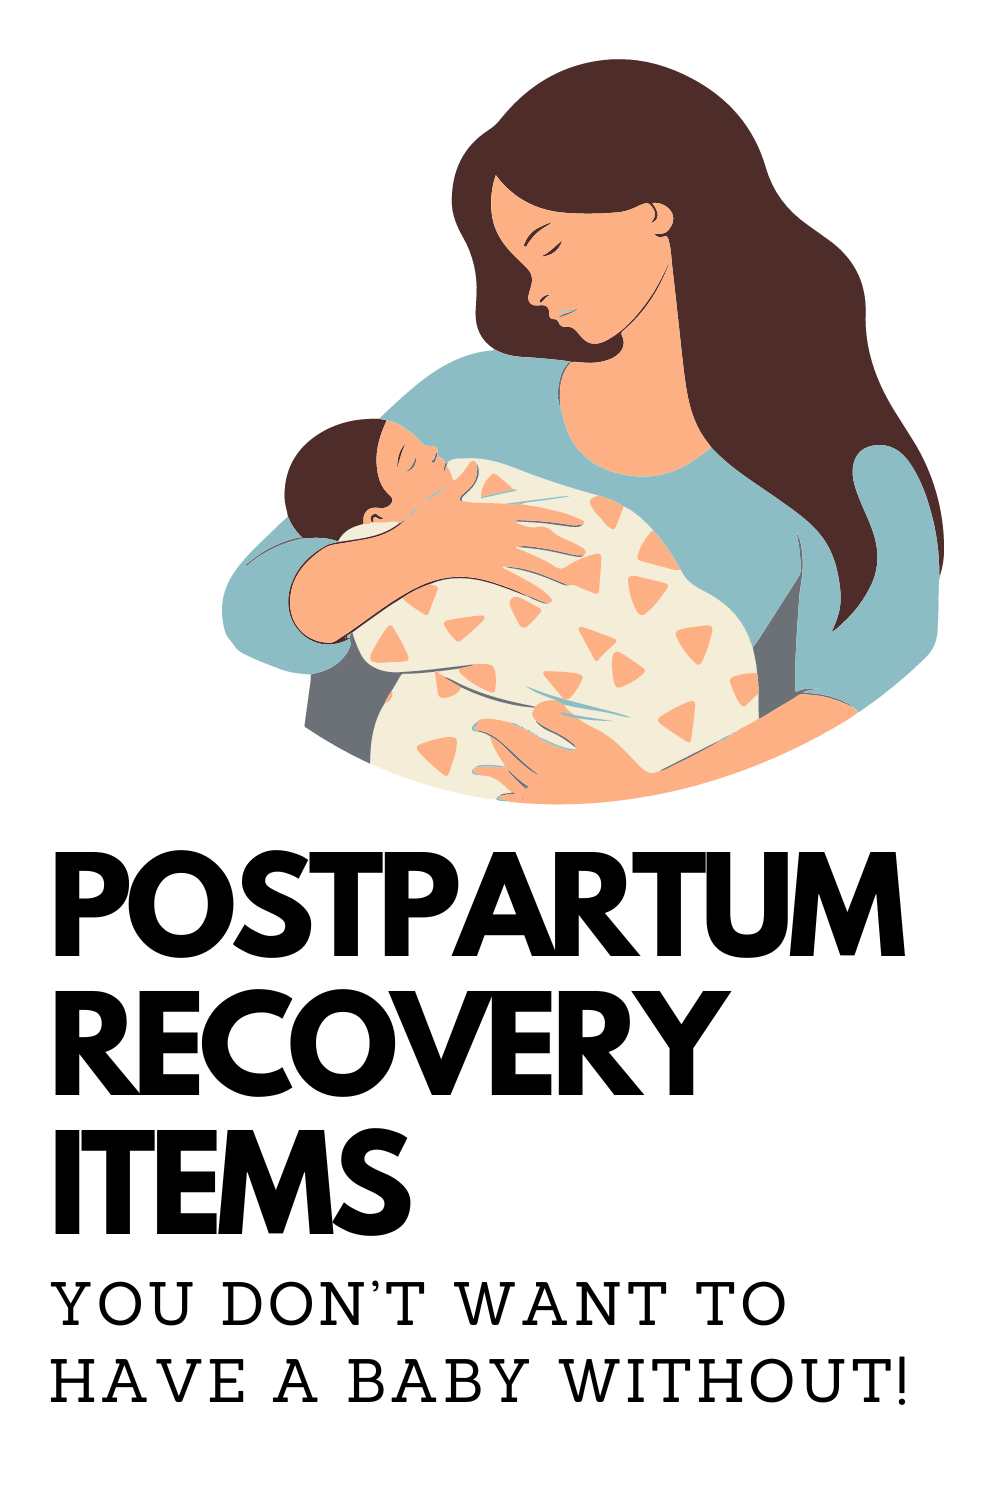 Want to bounce back after baby? Our go-to guide for postpartum essentials will ensure you're prepped for a smoother recovery. From medications to maternity wear, your comfort is our priority. Don't forget to click for the full list of must-haves!